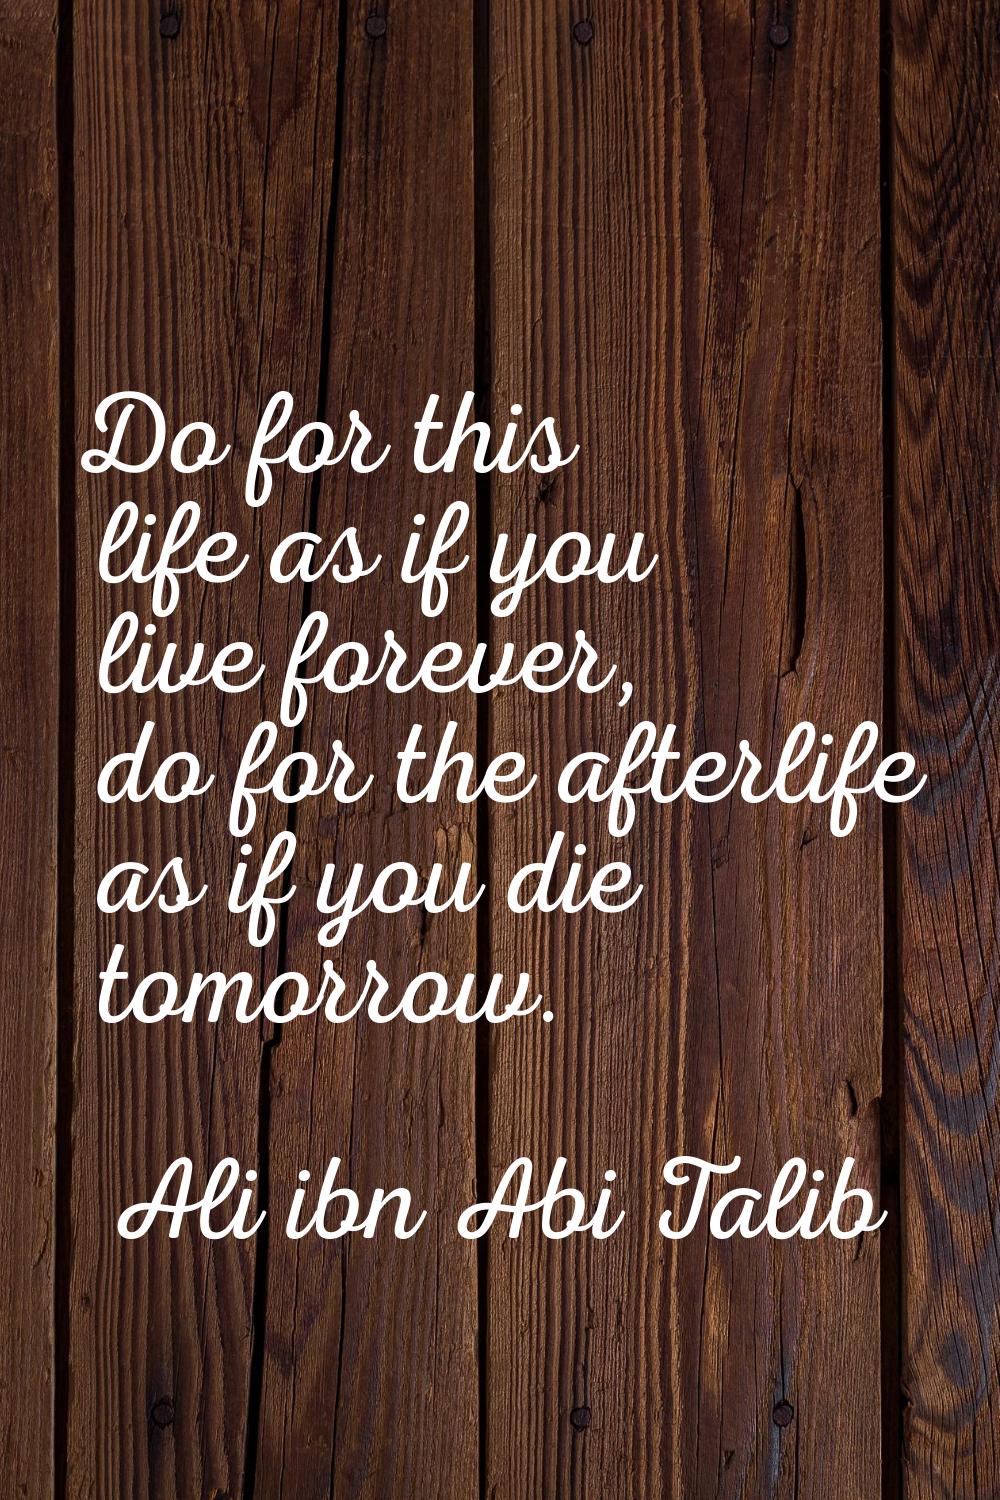 Do for this life as if you live forever, do for the afterlife as if you die tomorrow.